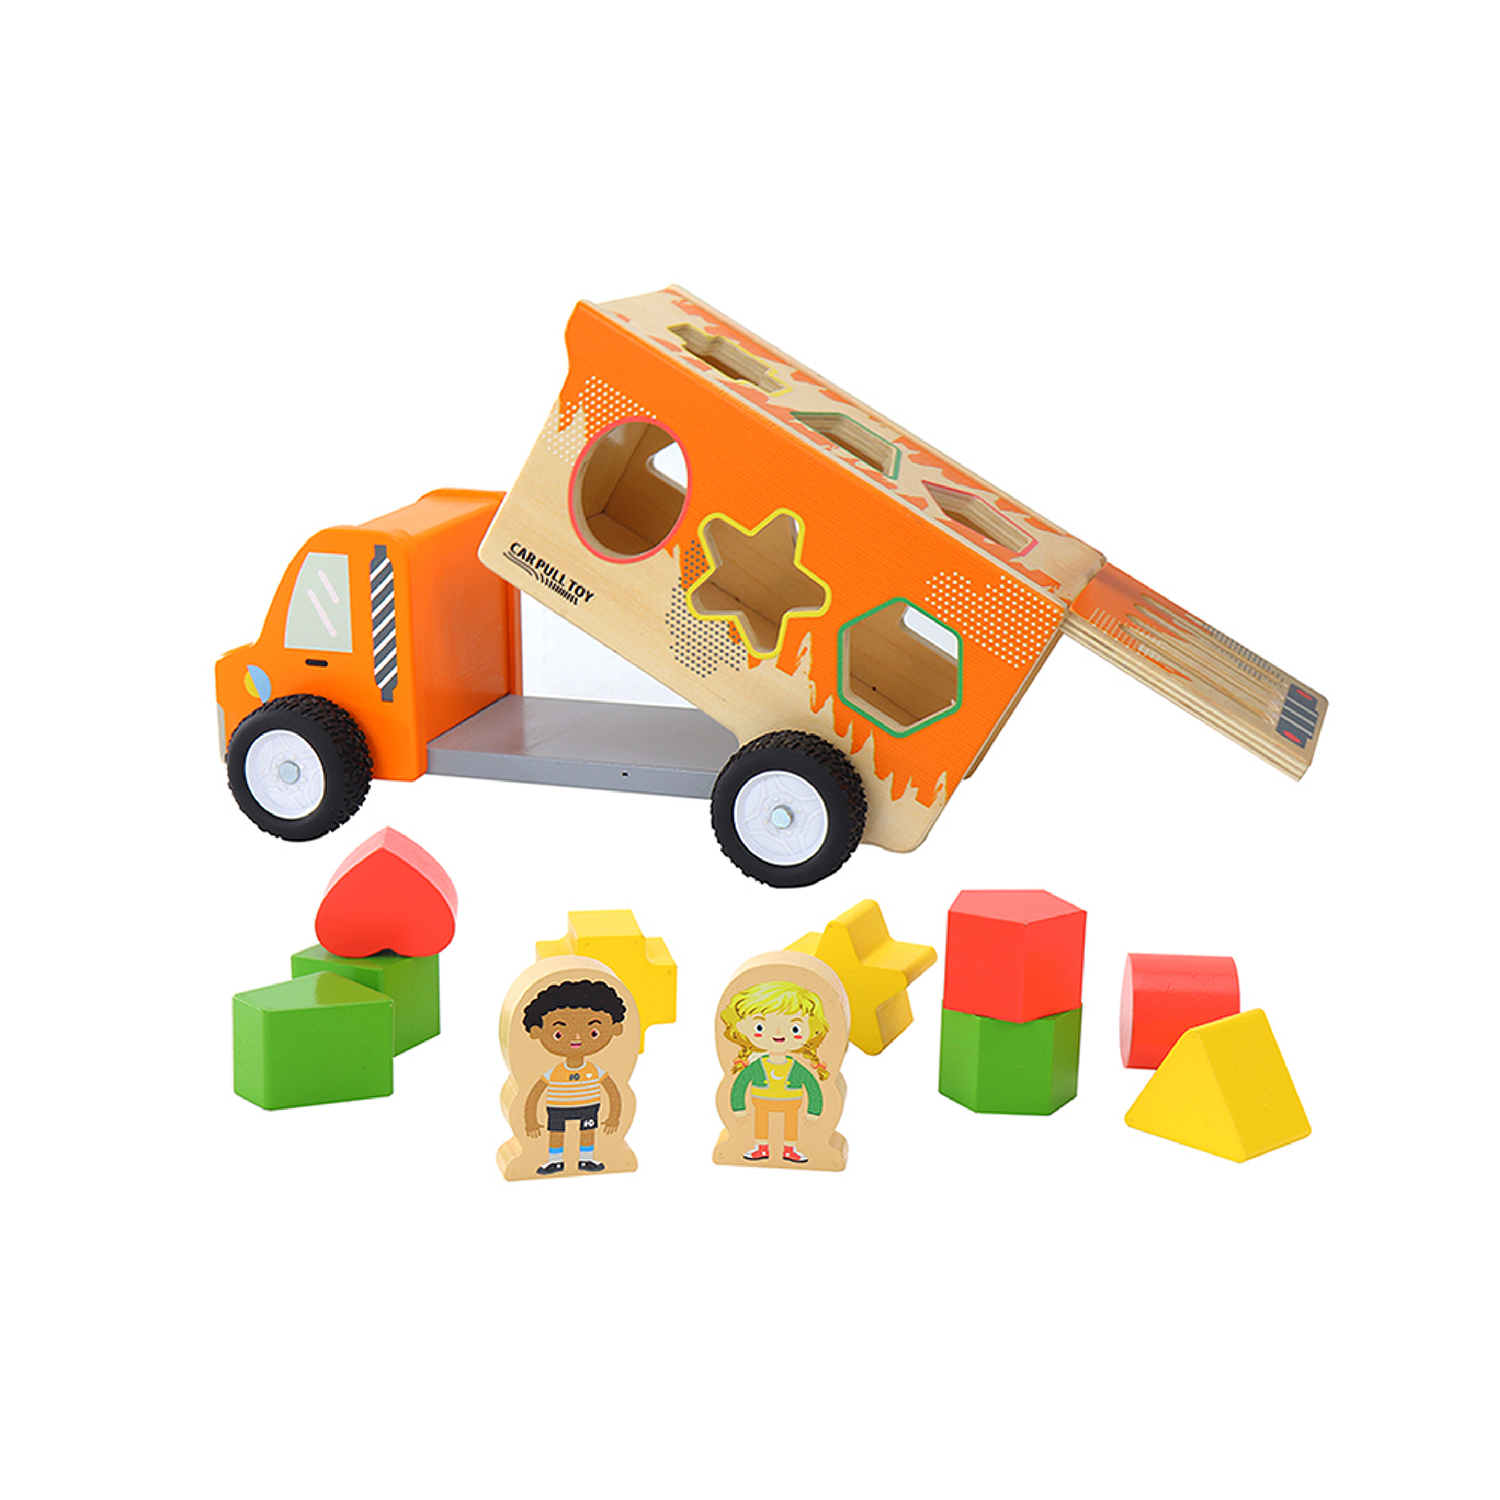 Leo & Friends Shapes & Colors Sorting Dump Truck for Toddlers - image 1 of 8